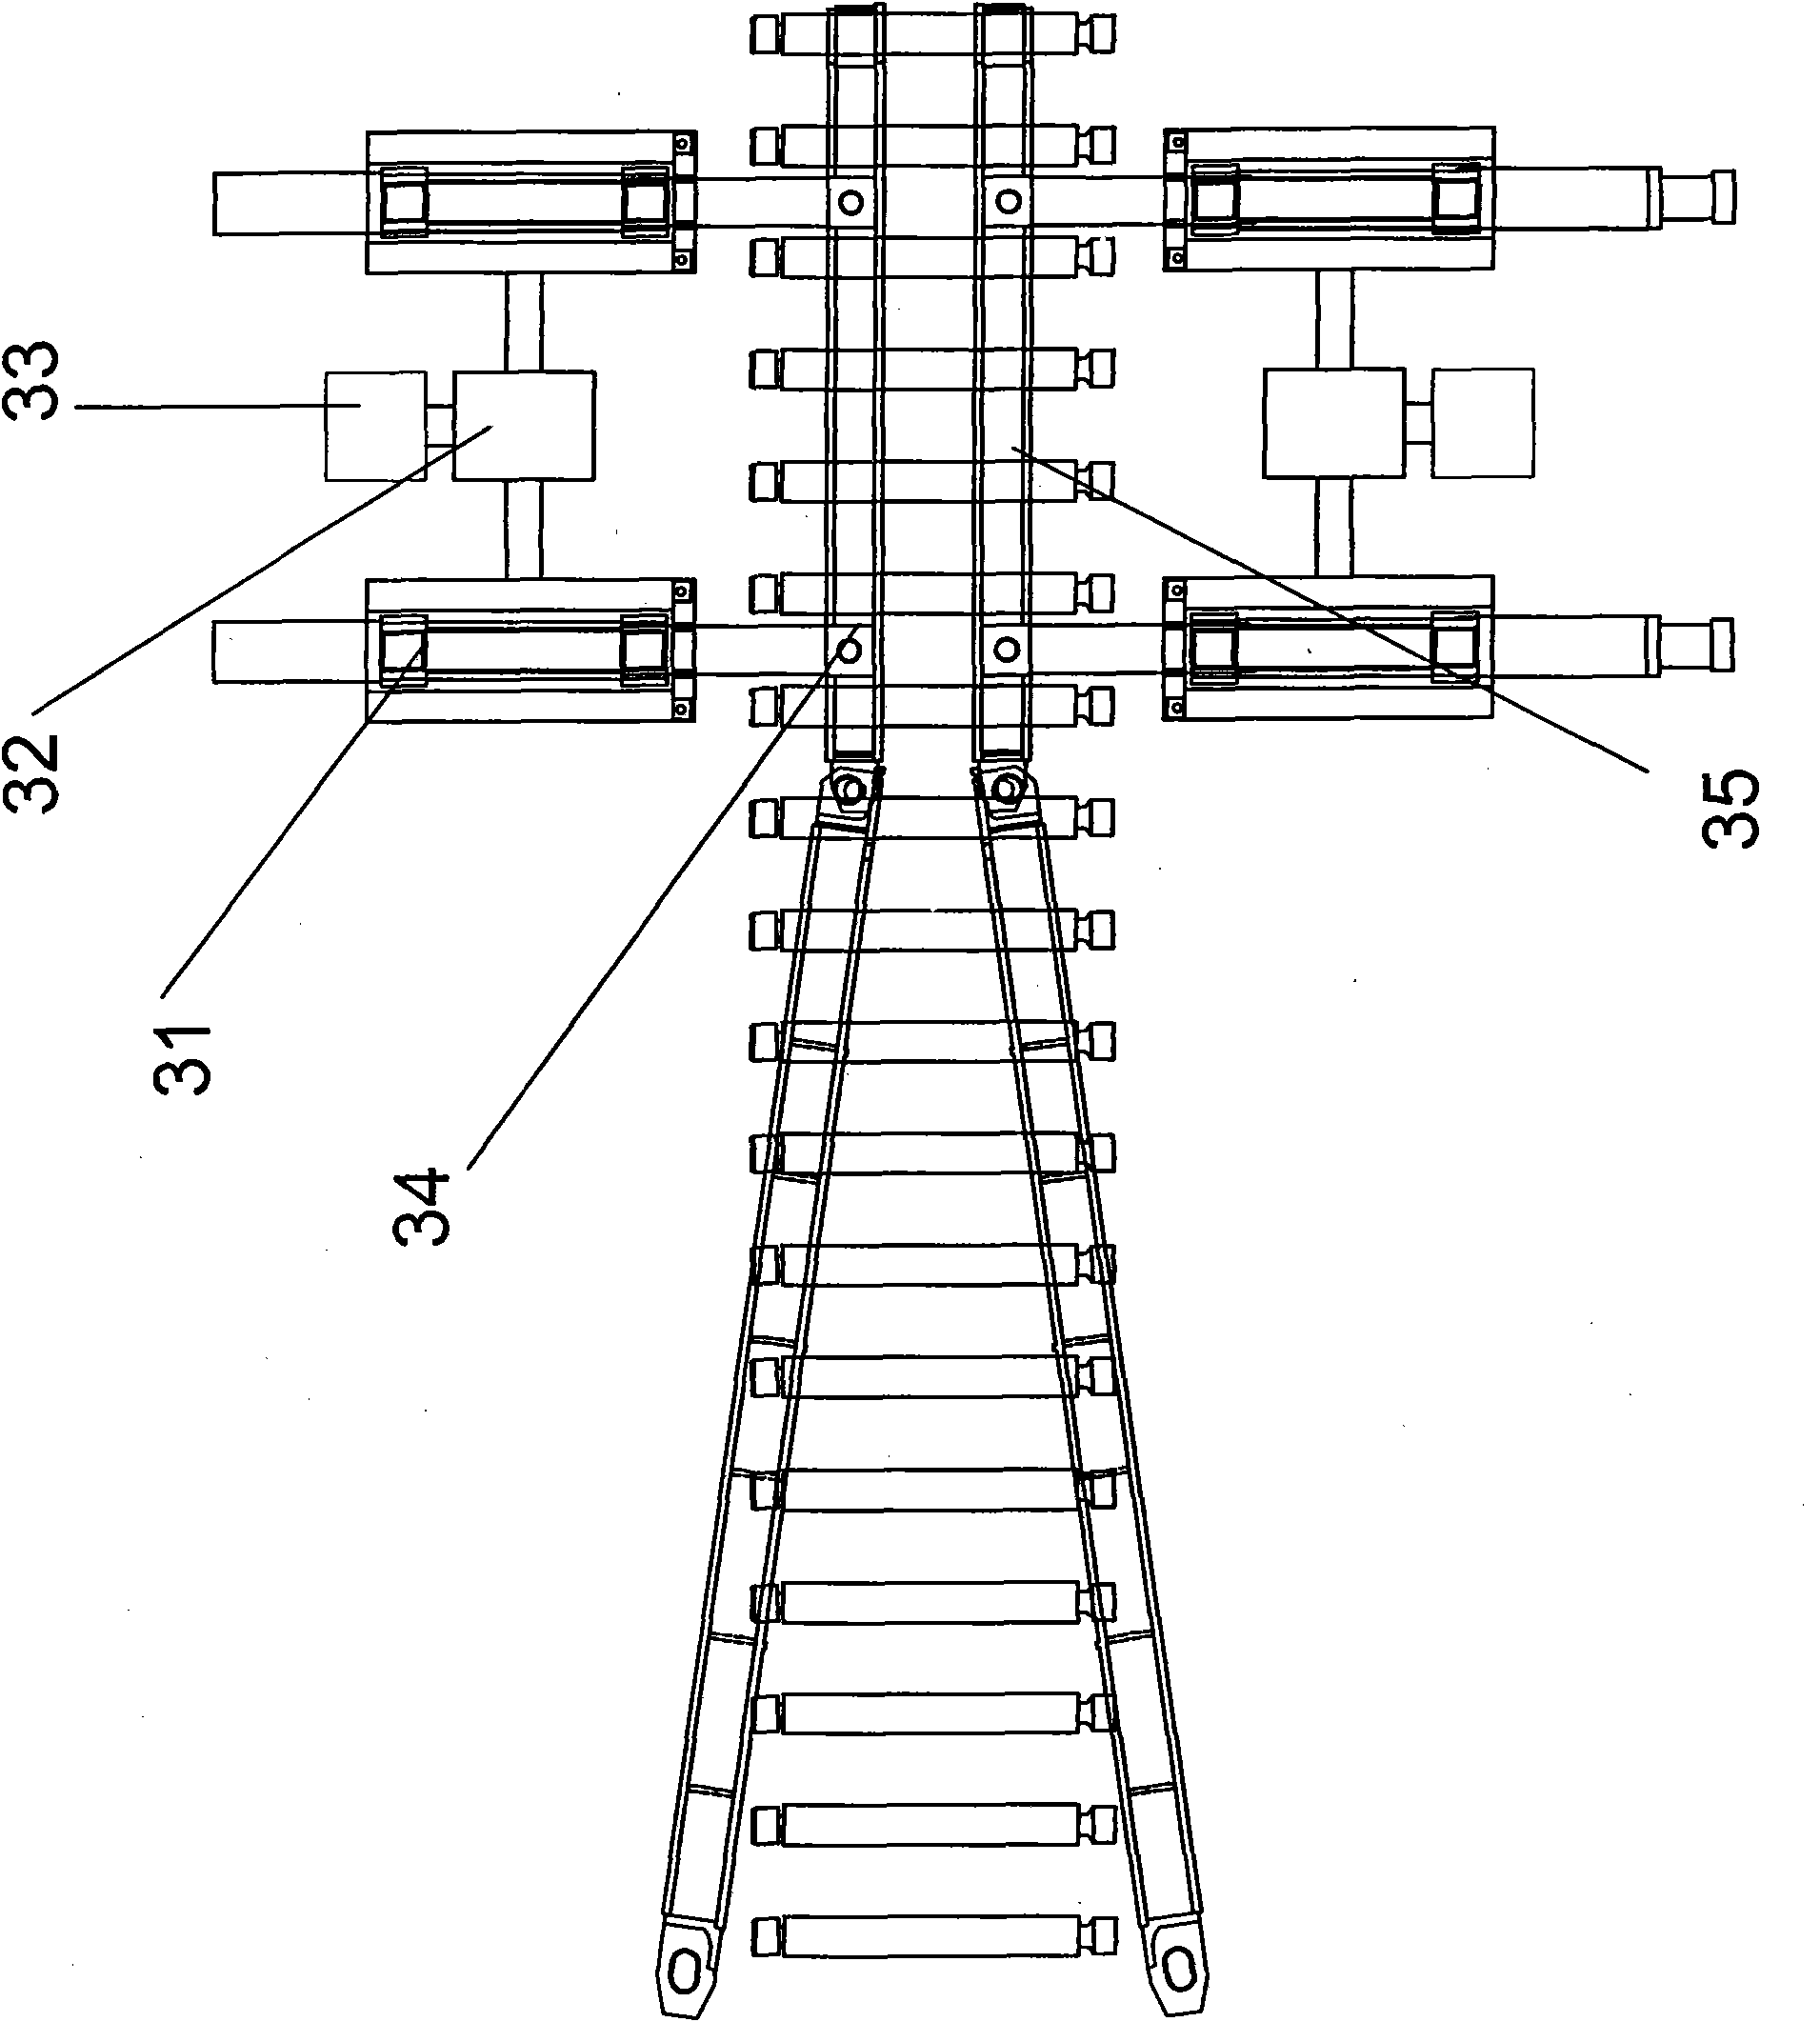 Control method of alternative pressure of side guides of hot strip mill coiler